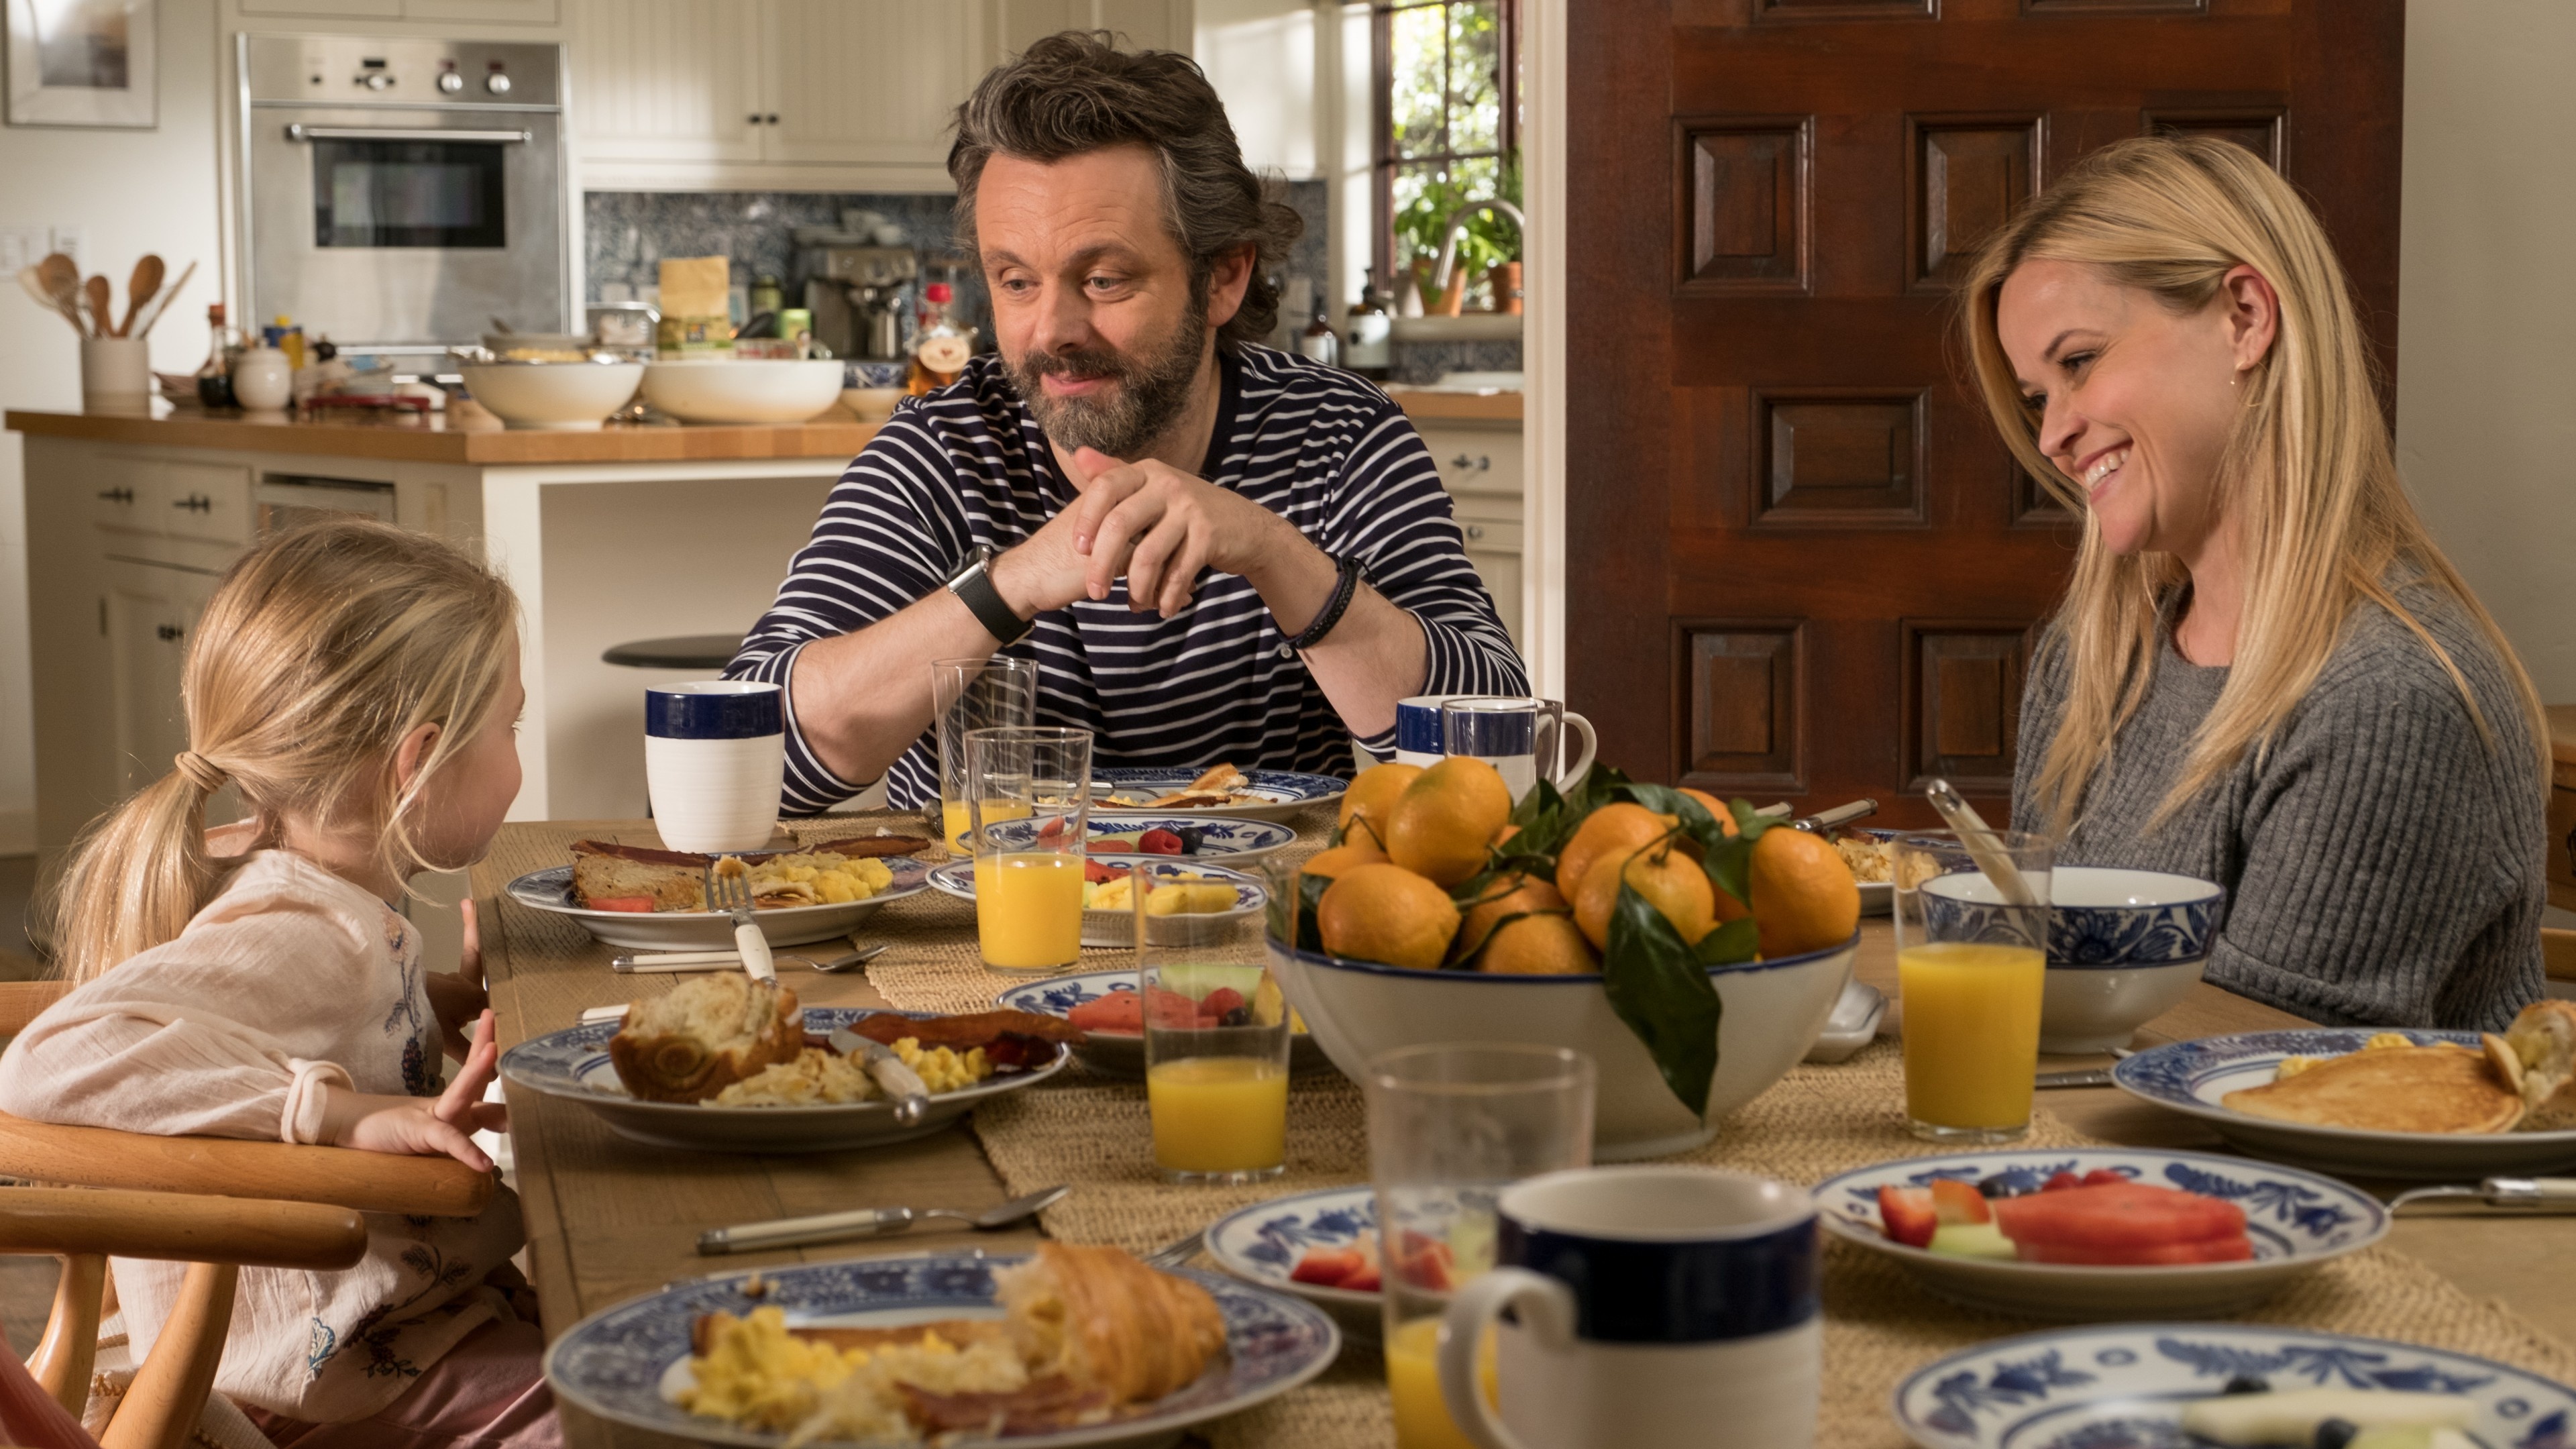 Home Again movie, Reese Witherspoon and Michael Sheen, 5K resolution, Captivating visuals, 3840x2160 4K Desktop